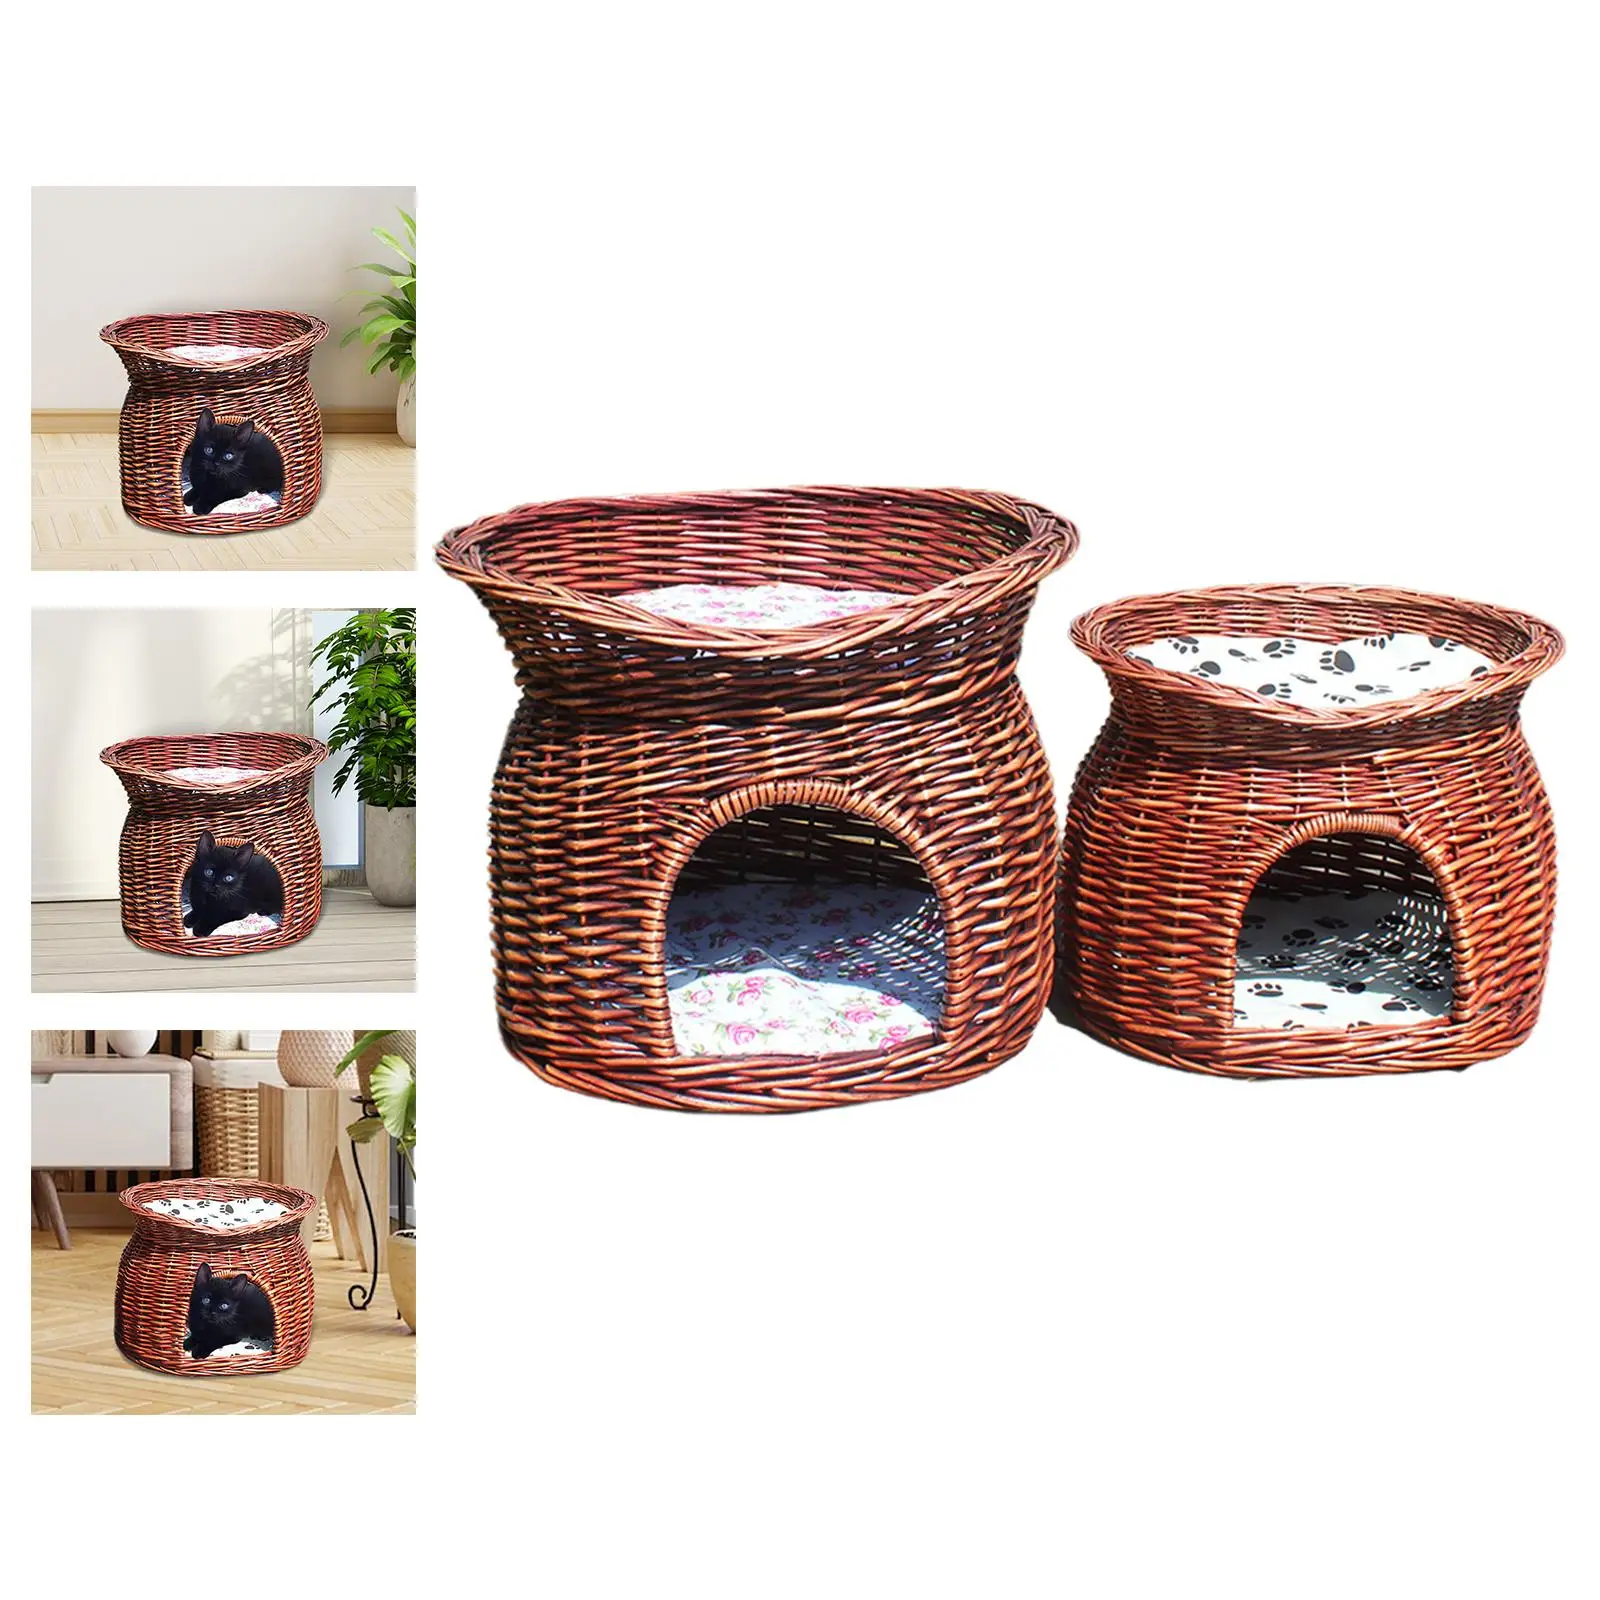 Pet House Rattan Woven Dog Bed with Soft Cushion Cat Nest Handmade Braided Cat Bed